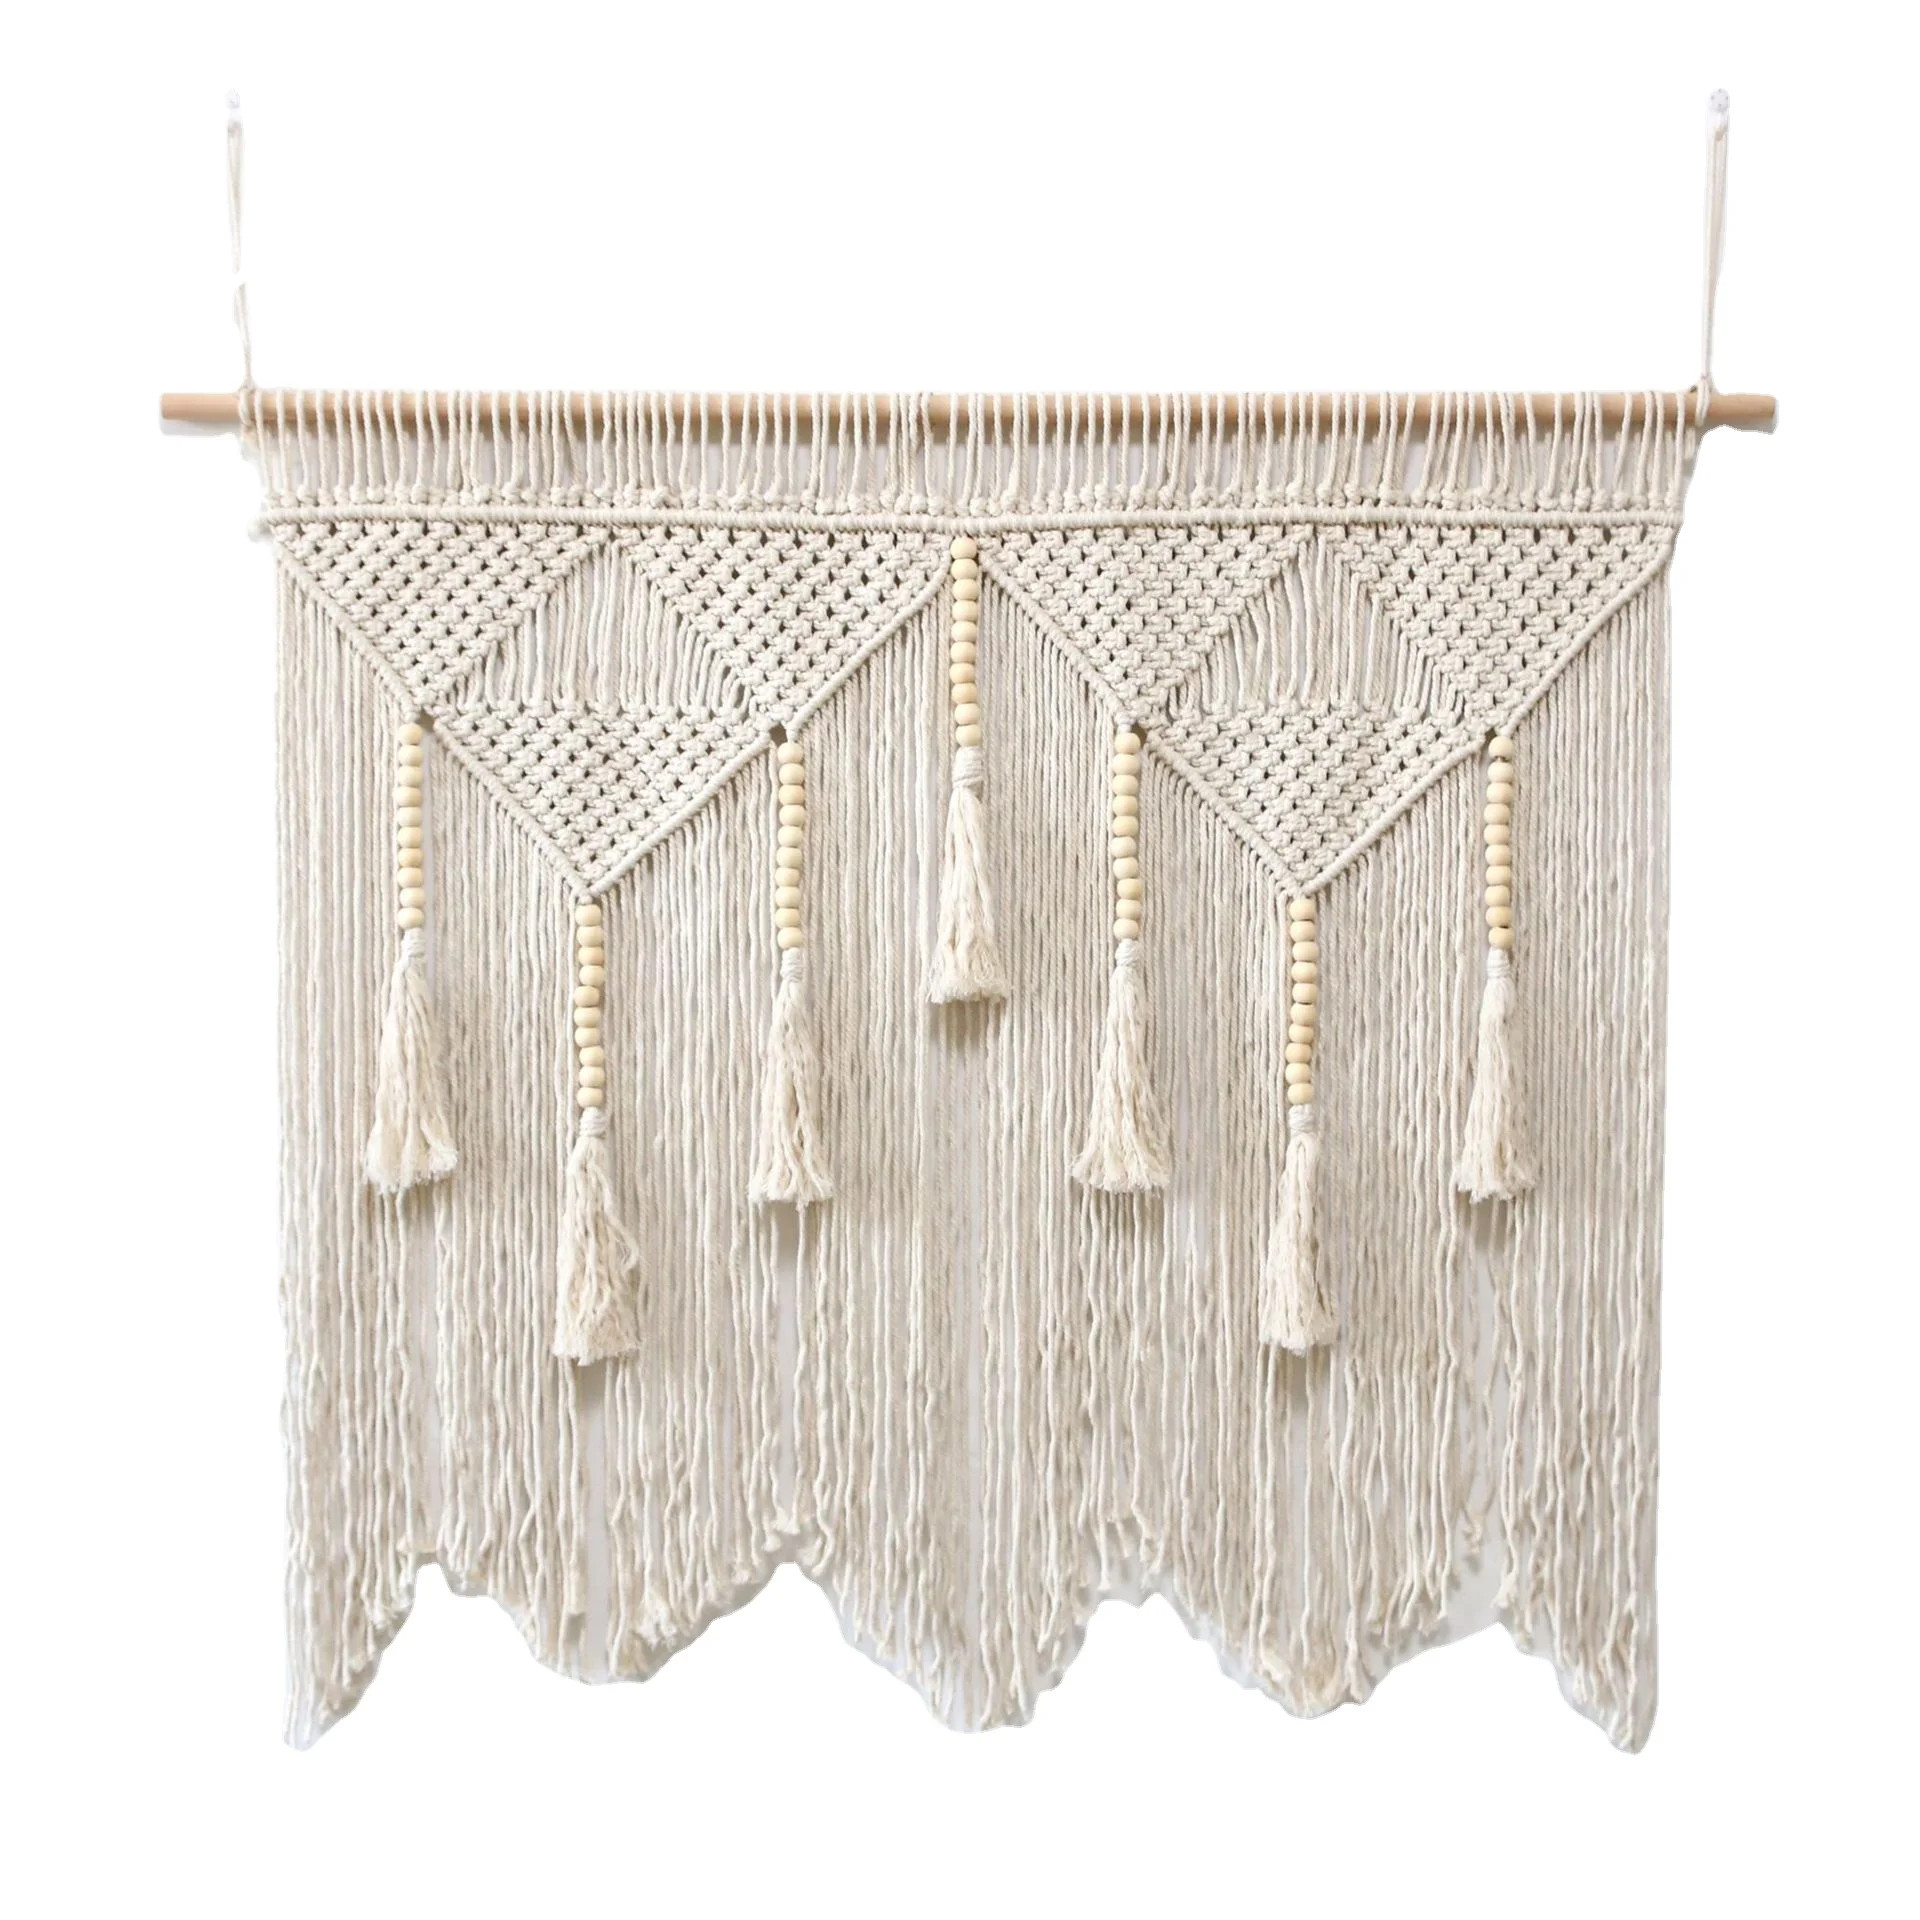 

Rattan Plate-seagrass Plate Decor Macrame Wall Hanging For Decoration - Wicker Wall Basket, White/black